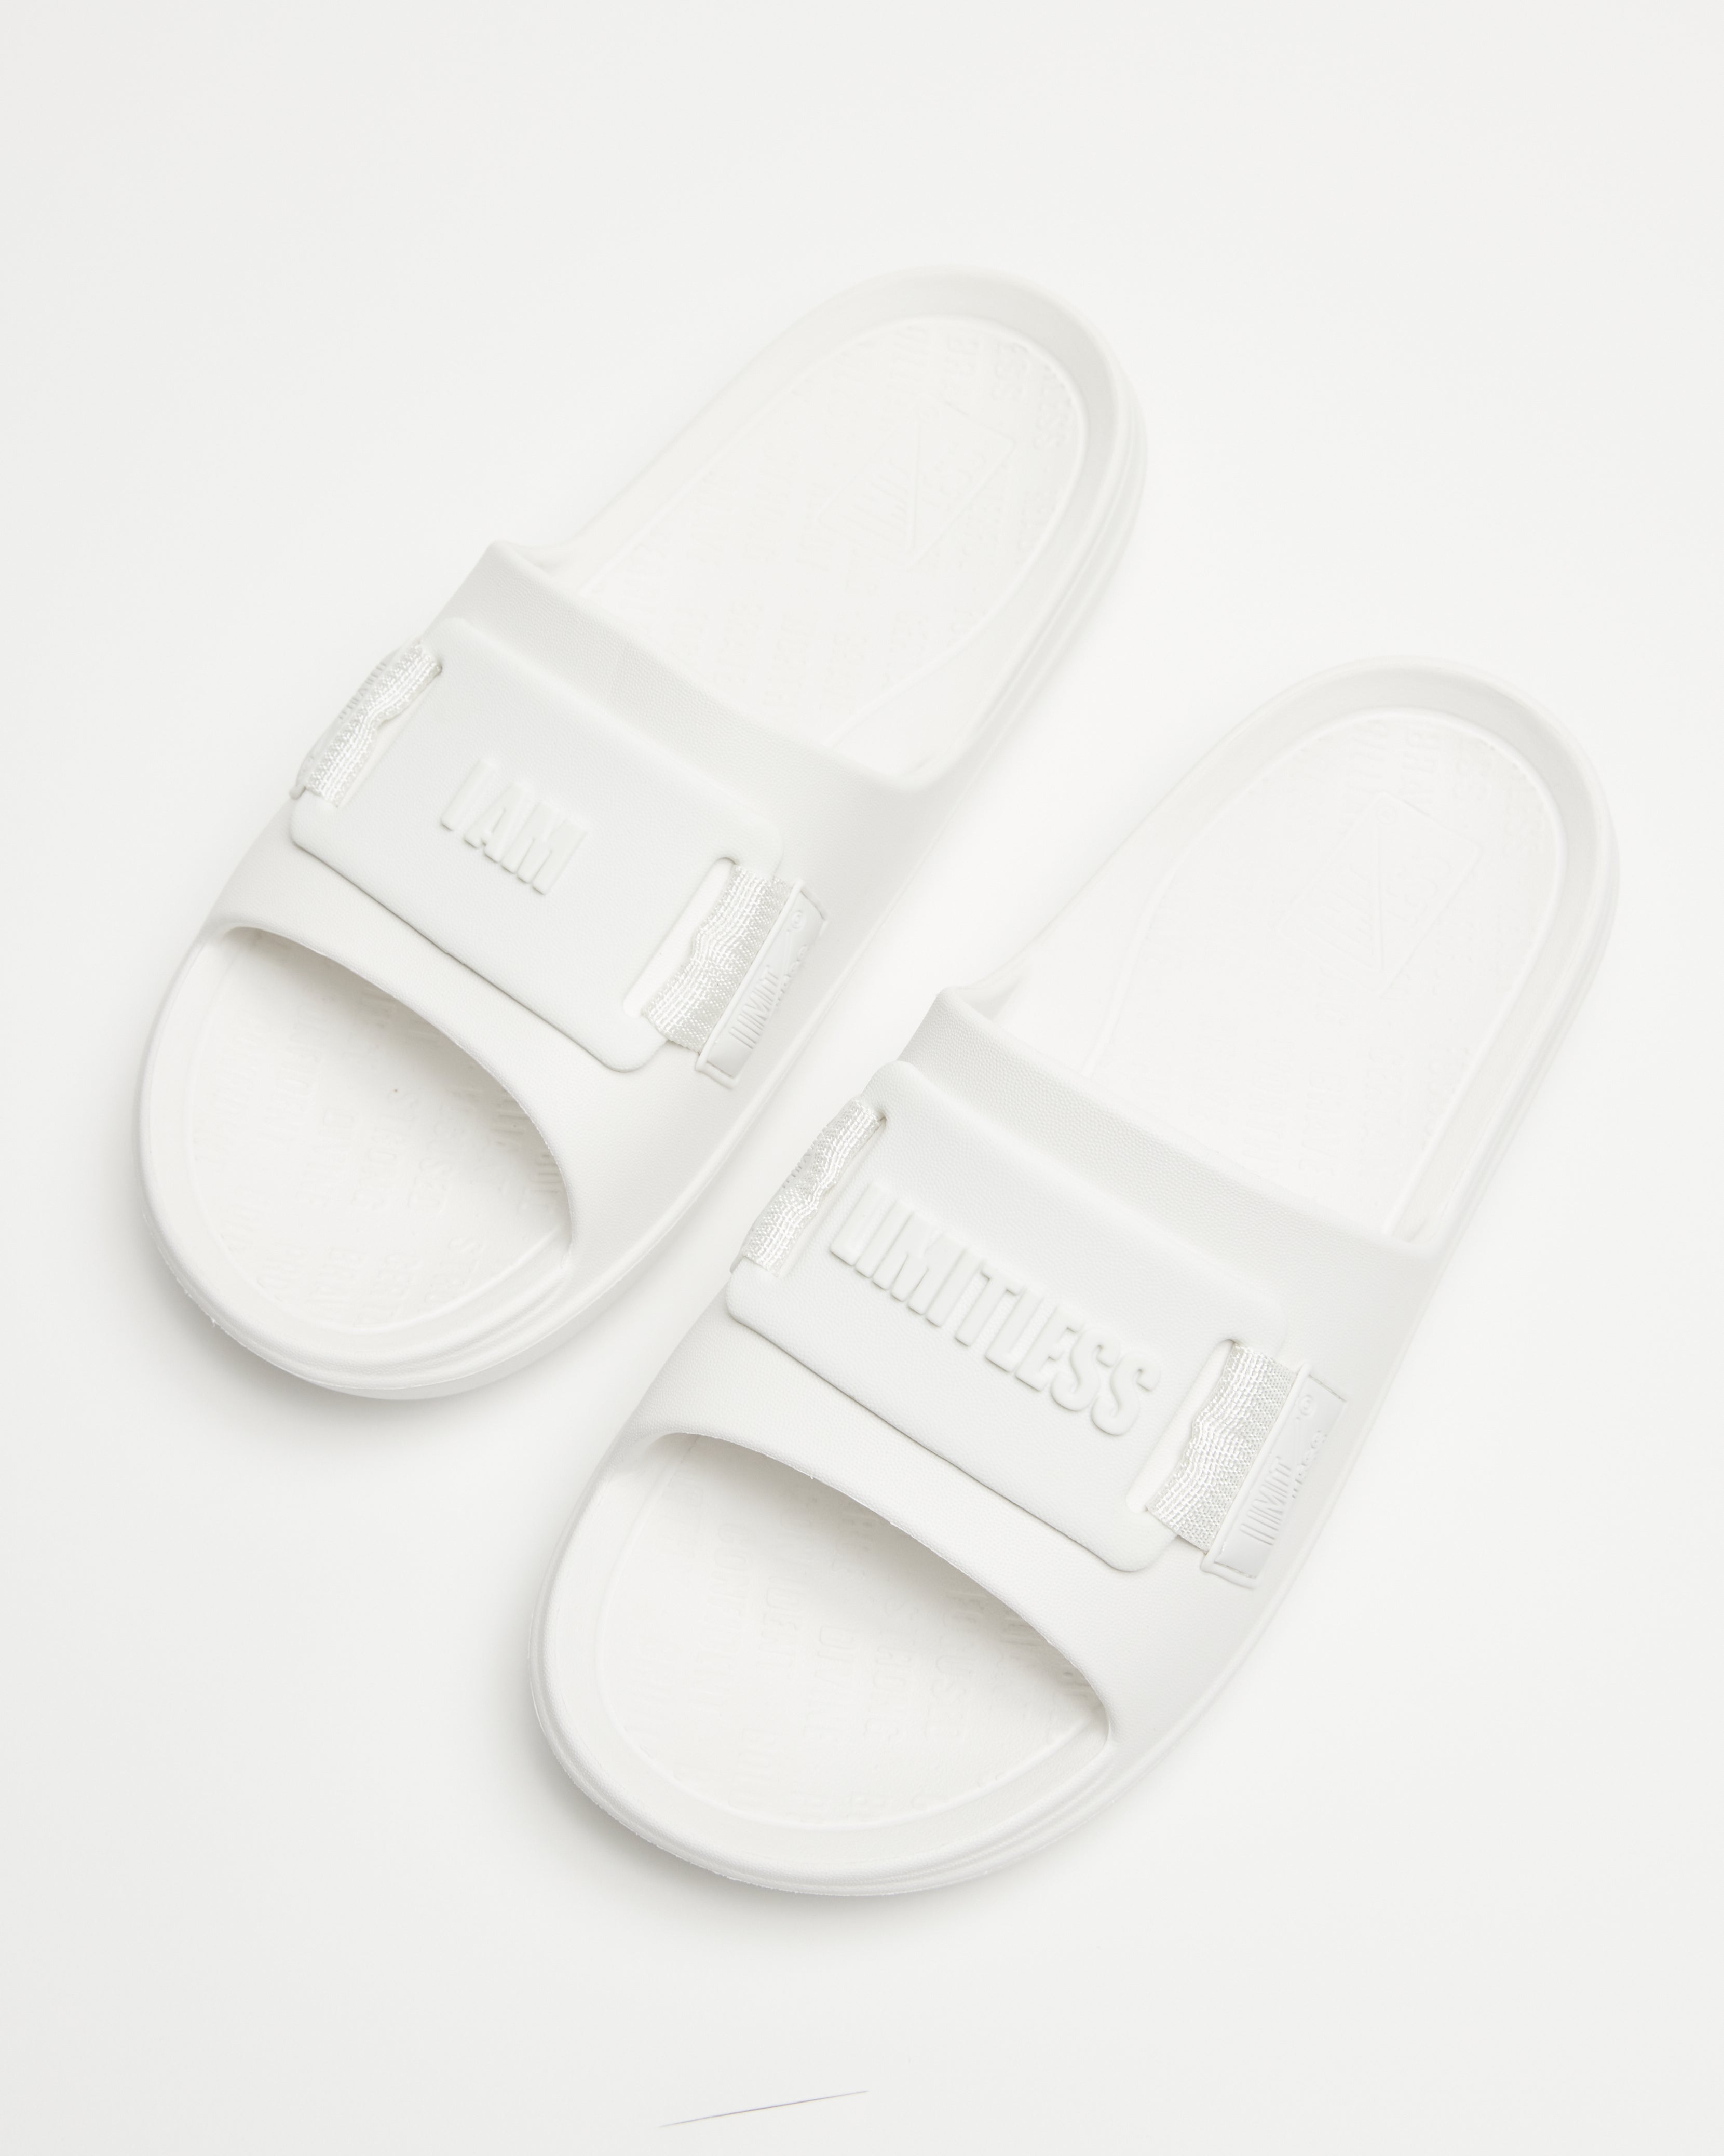 LIMITLESS SLIDES™ WITH ESSENTIAL TIBAH™ QUAD - BATAILLA ACADEMIE OF THE DANSE EDITION